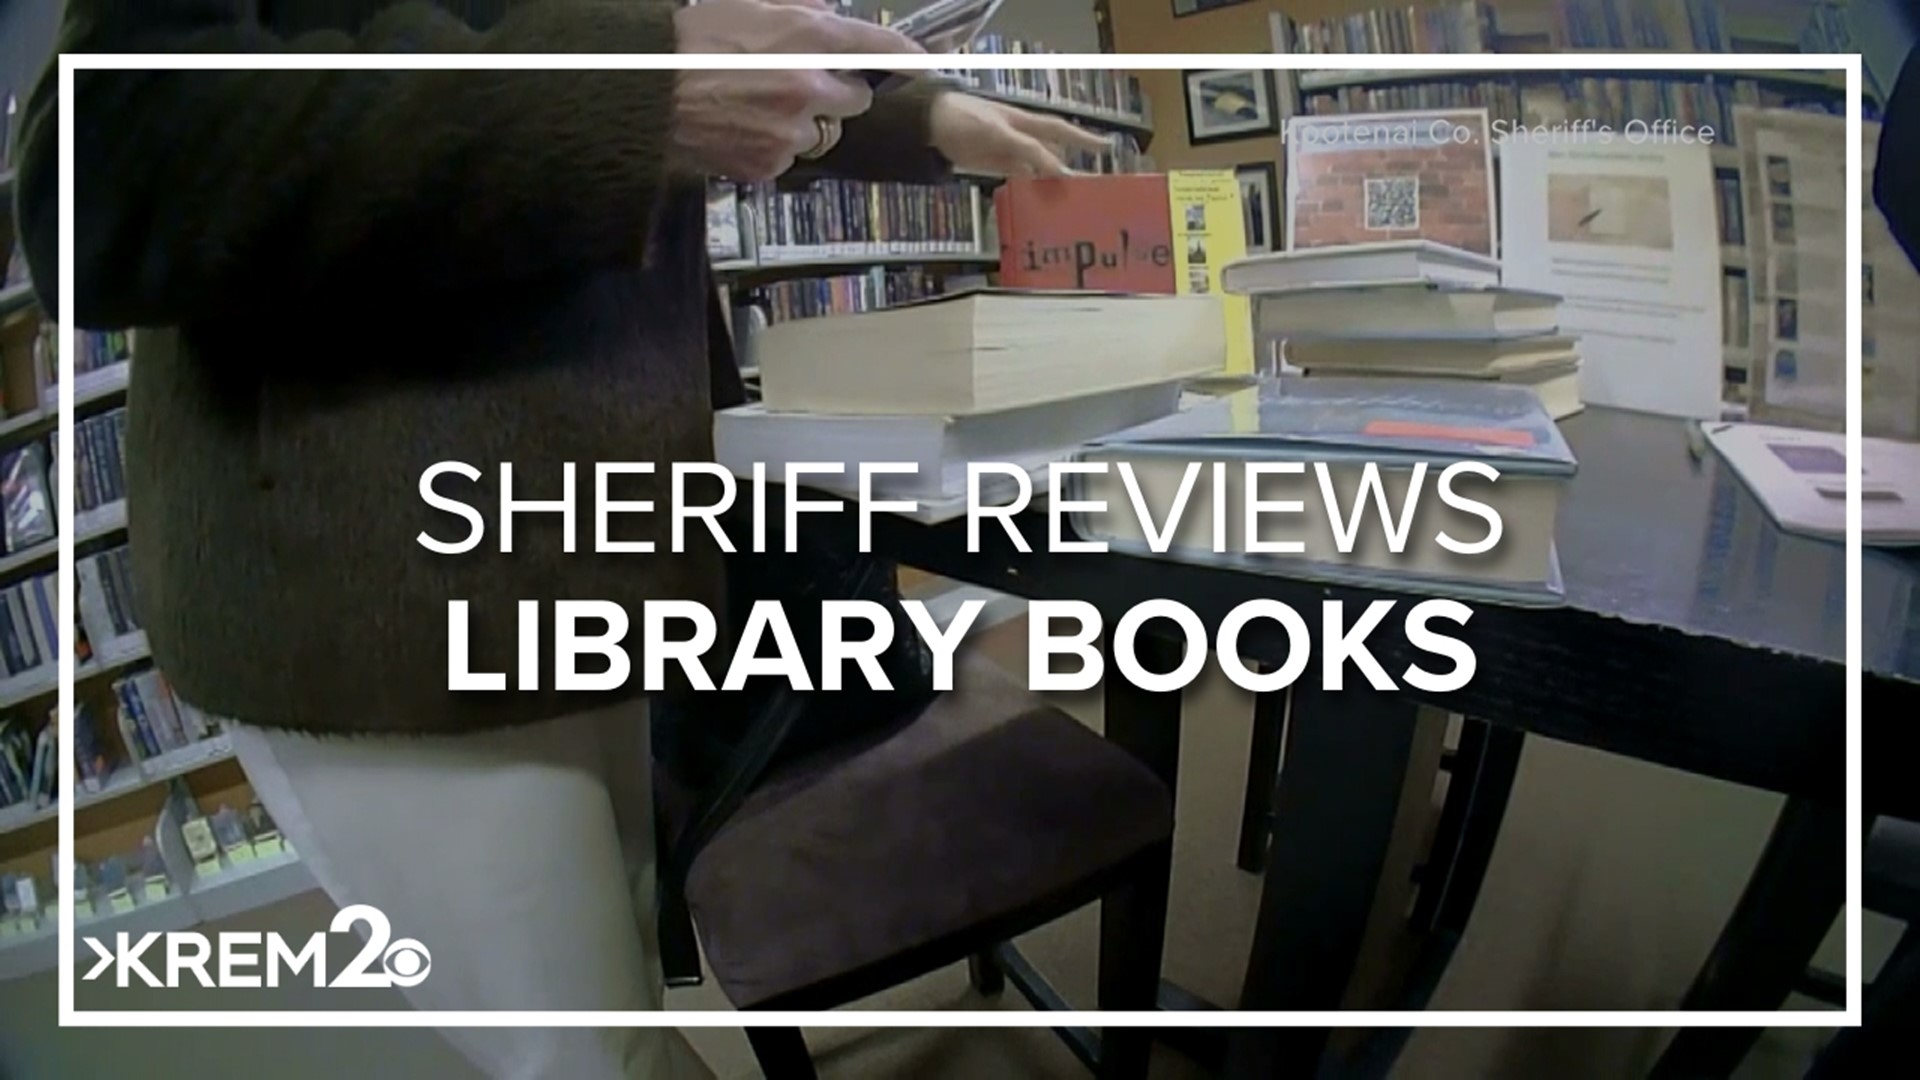 Newly obtained body cam footage from the Kootenai County Sheriff's Office shows Sheriff Bob Norris as he inspected books at Hayden Library last year.